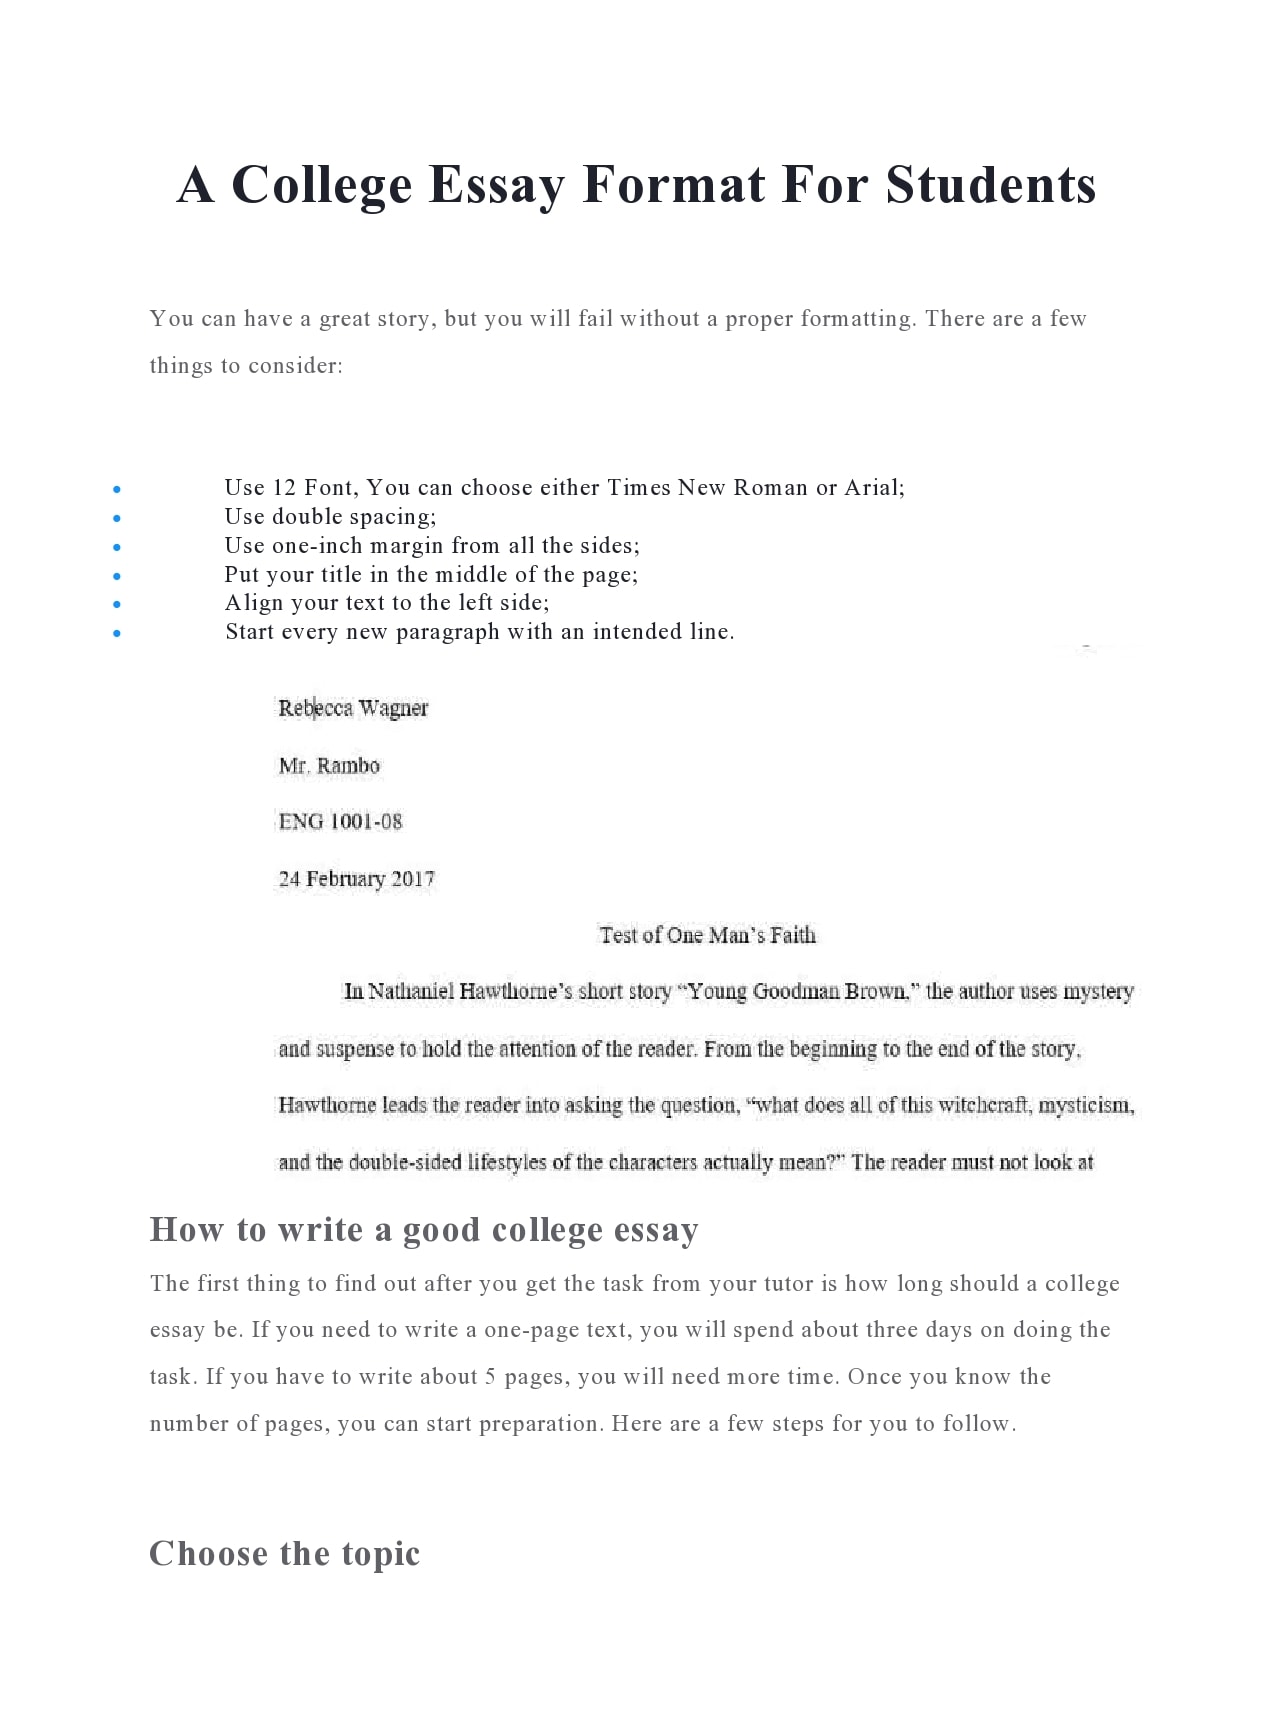 What to Write in a College Essay